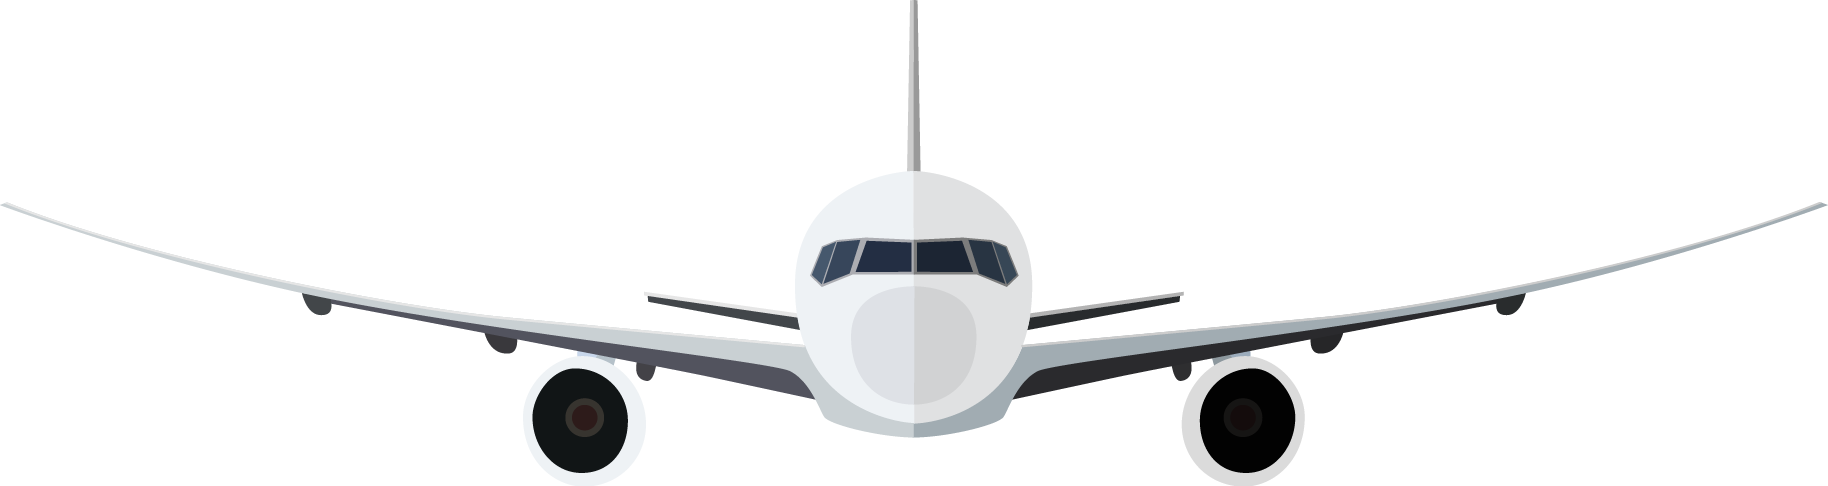 Free to Use & Public Domain Airplane Clip Art.